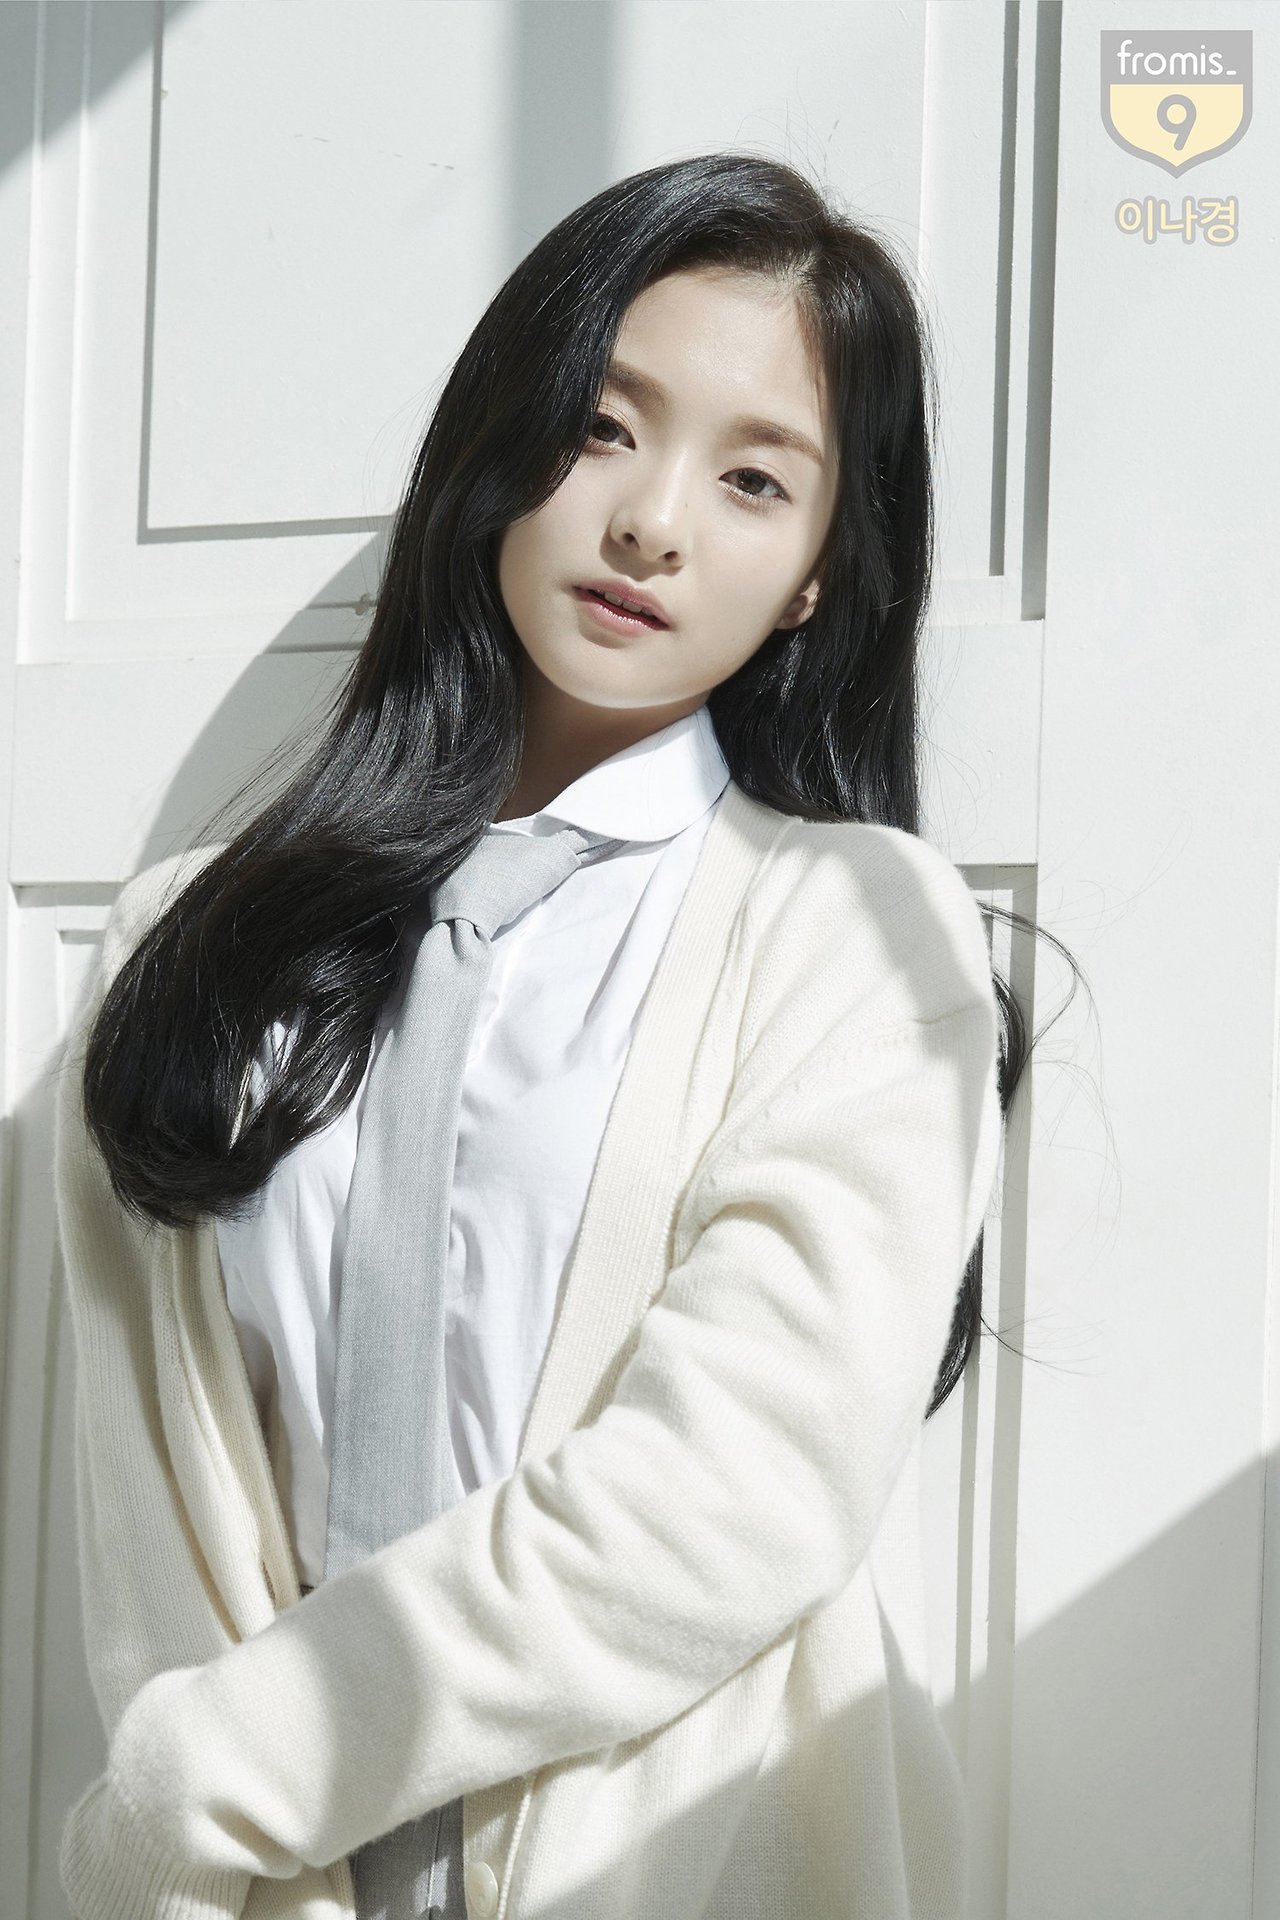 fy! fromis_9 — fromis_9 Official Profile Photo 05. LEE NAGYUNG...